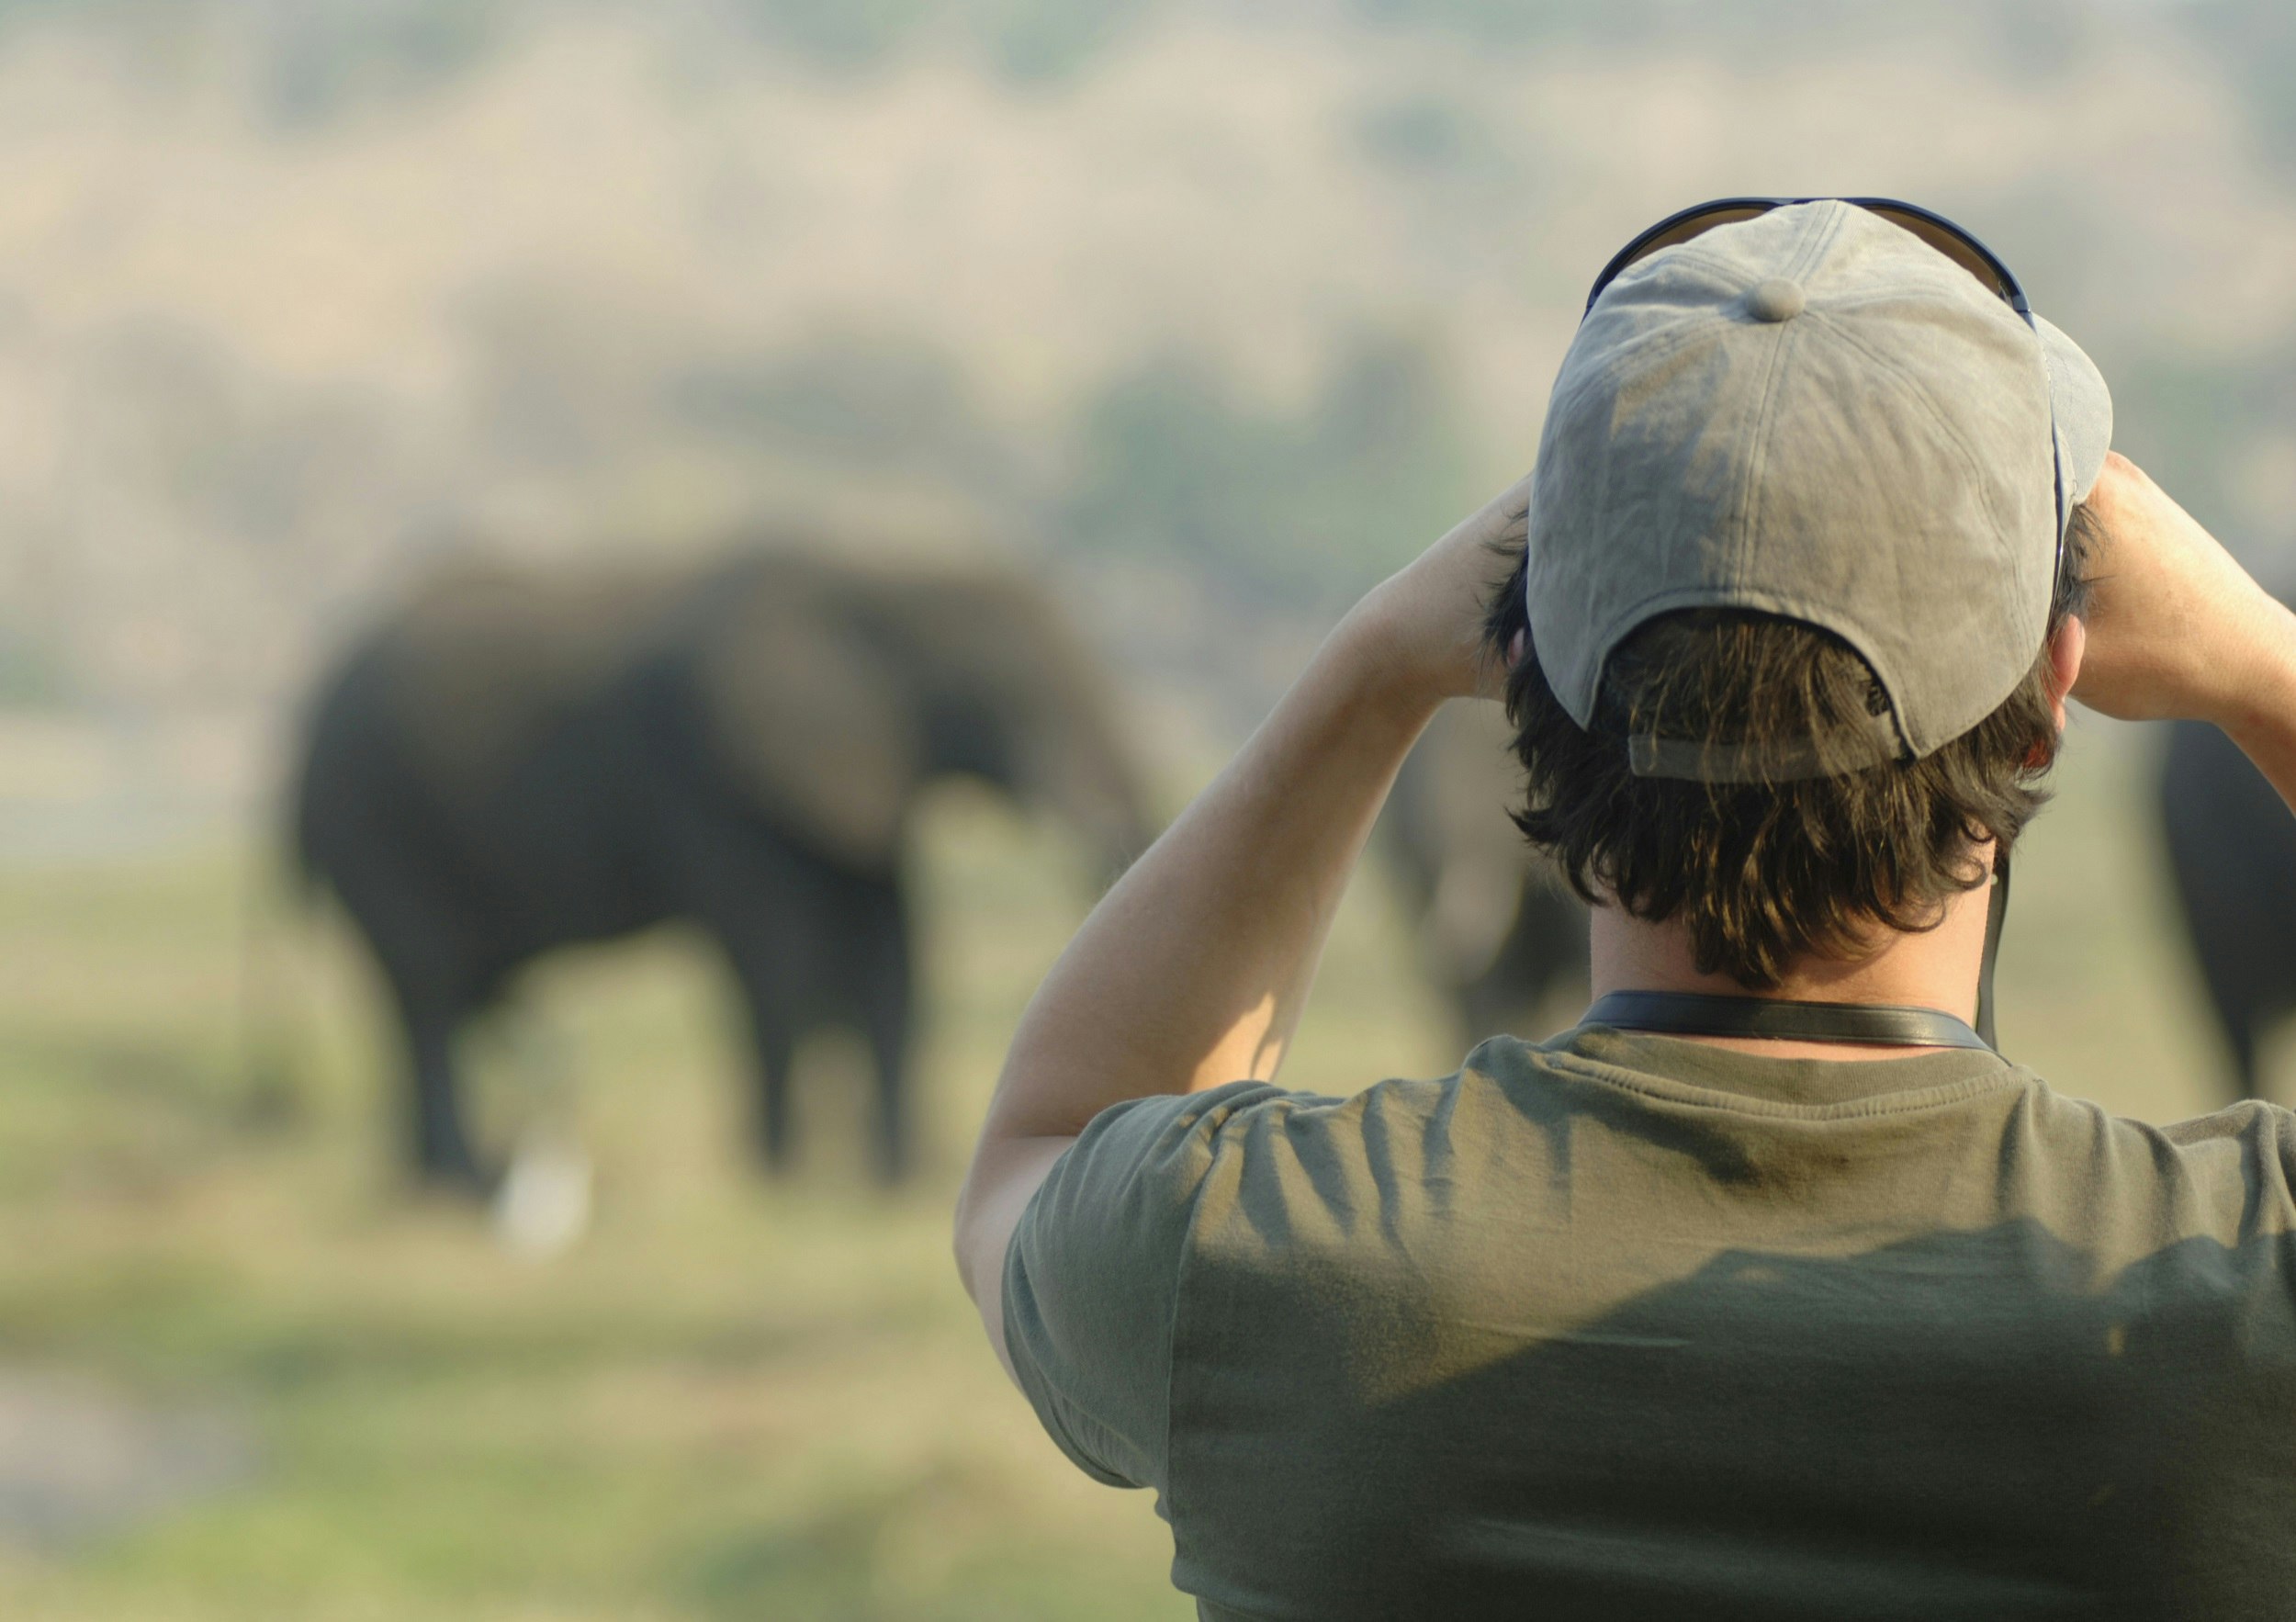 A safari guide (his back to the camera) looks through a pair of binoculars to a distant elephant on a grassy plain.